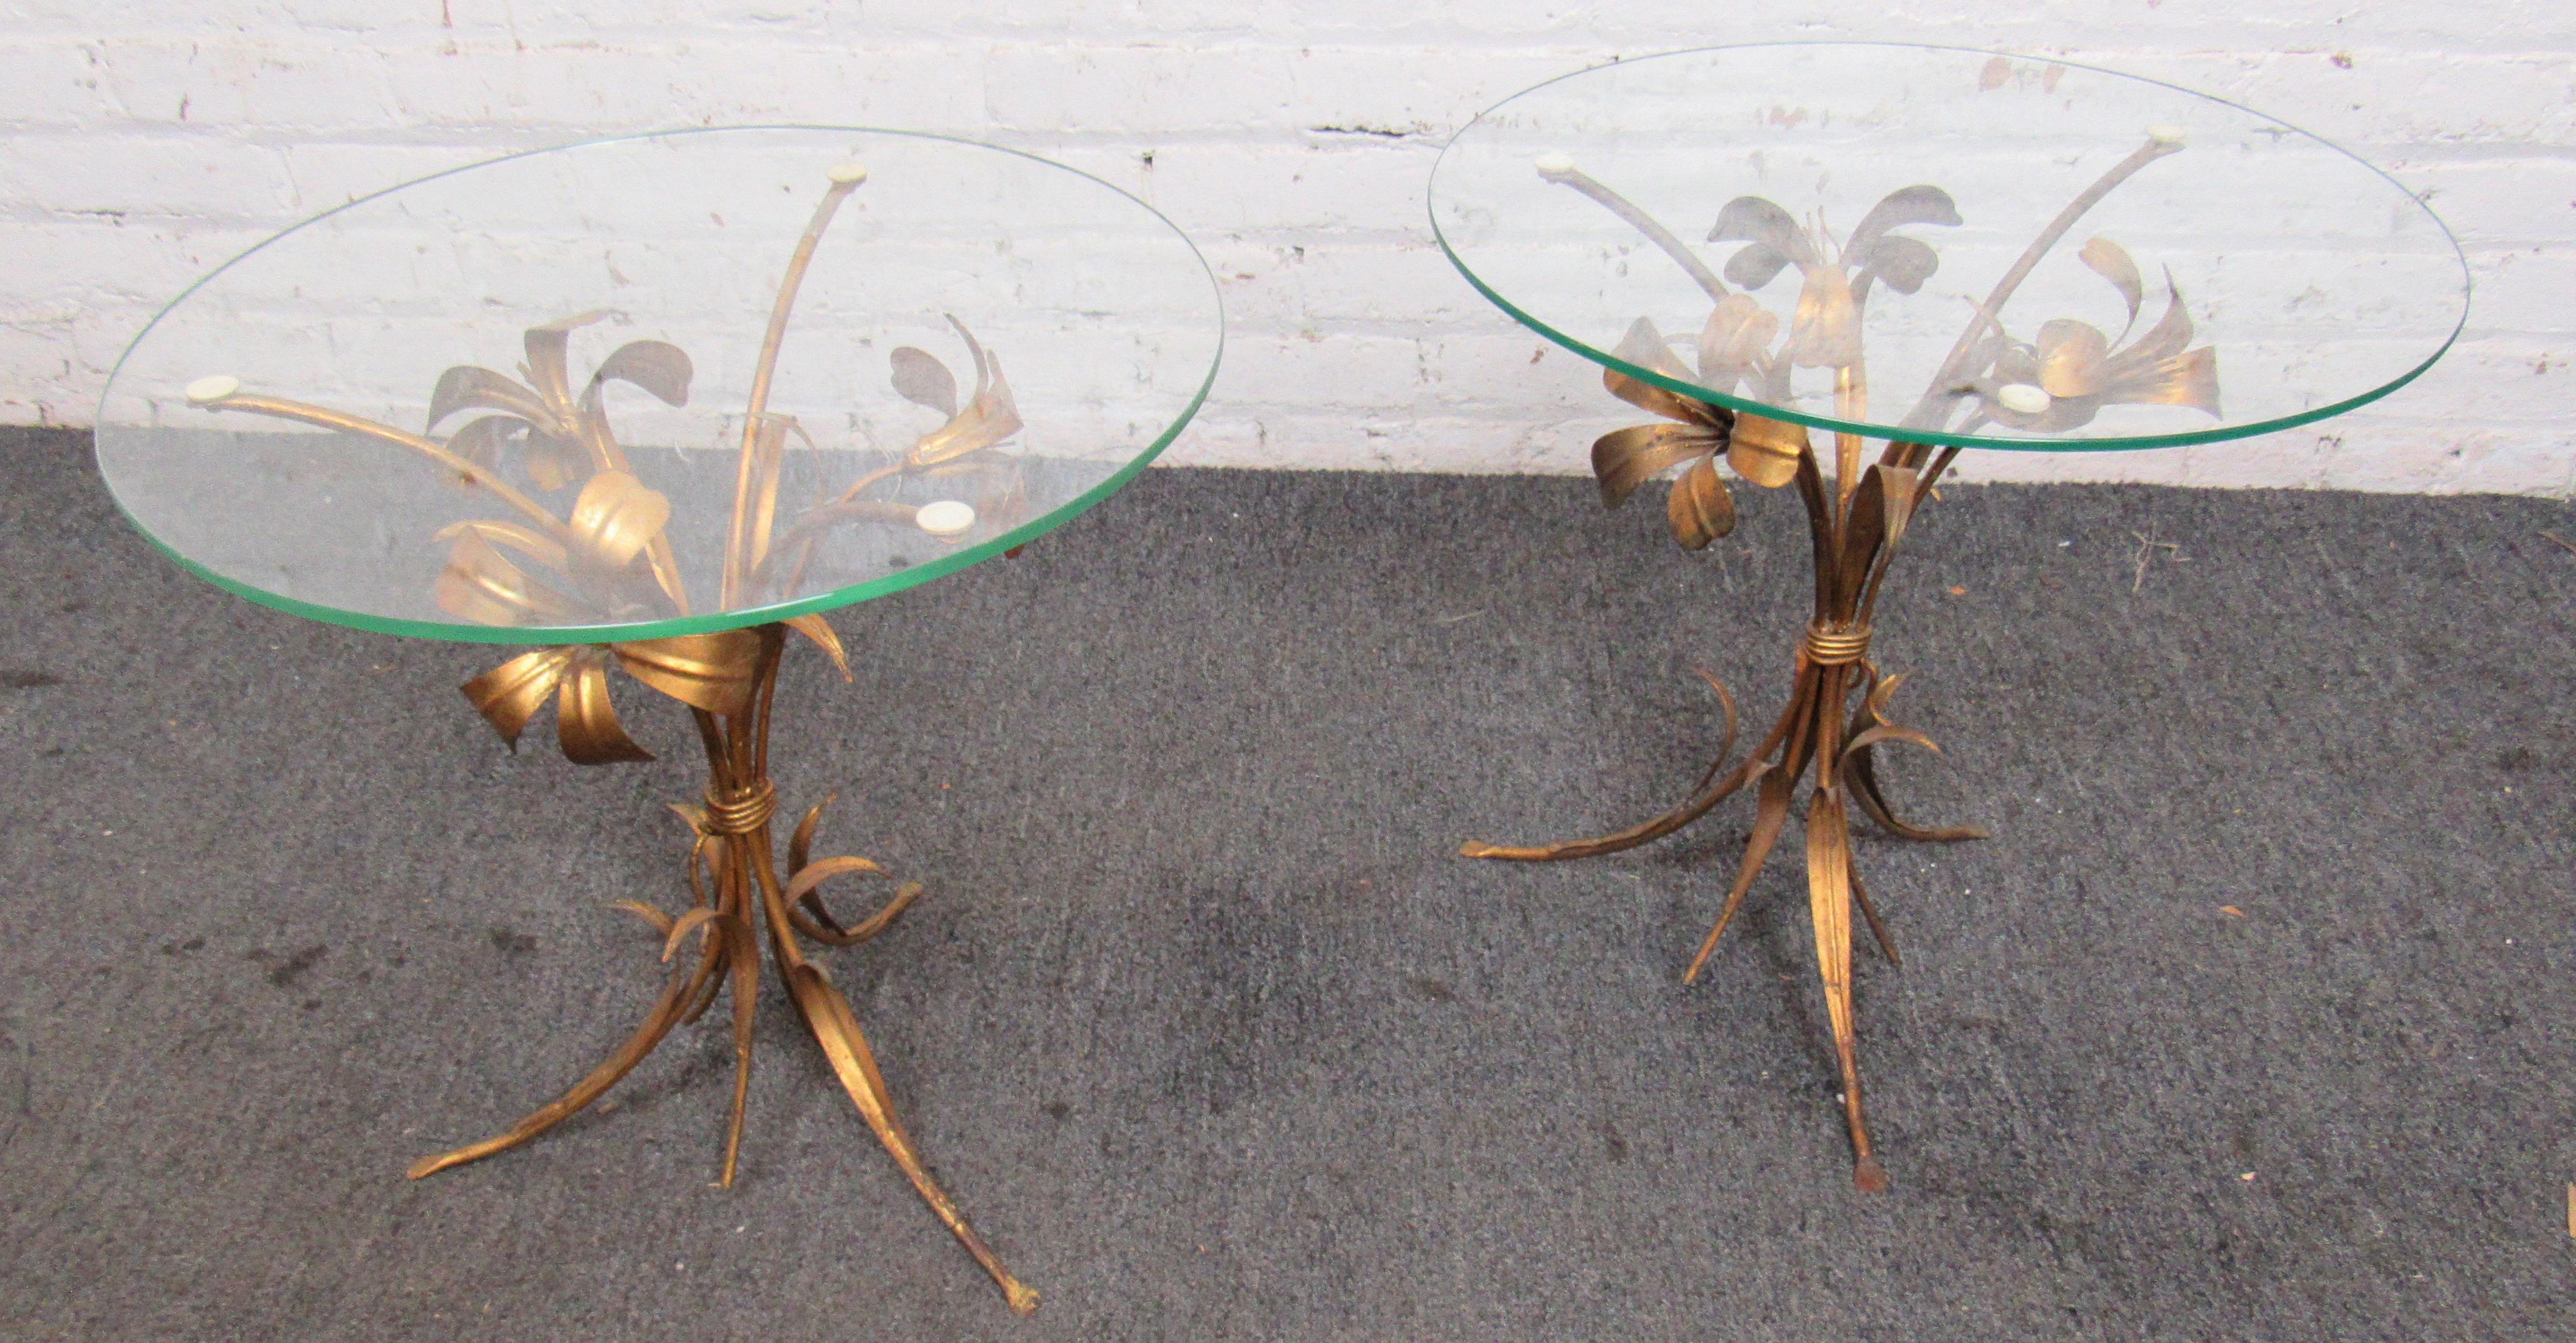 Elegant pair of glass and brass side tables. Italian made with floral bases.
(Please confirm item location - NY or NJ - with dealer).
 